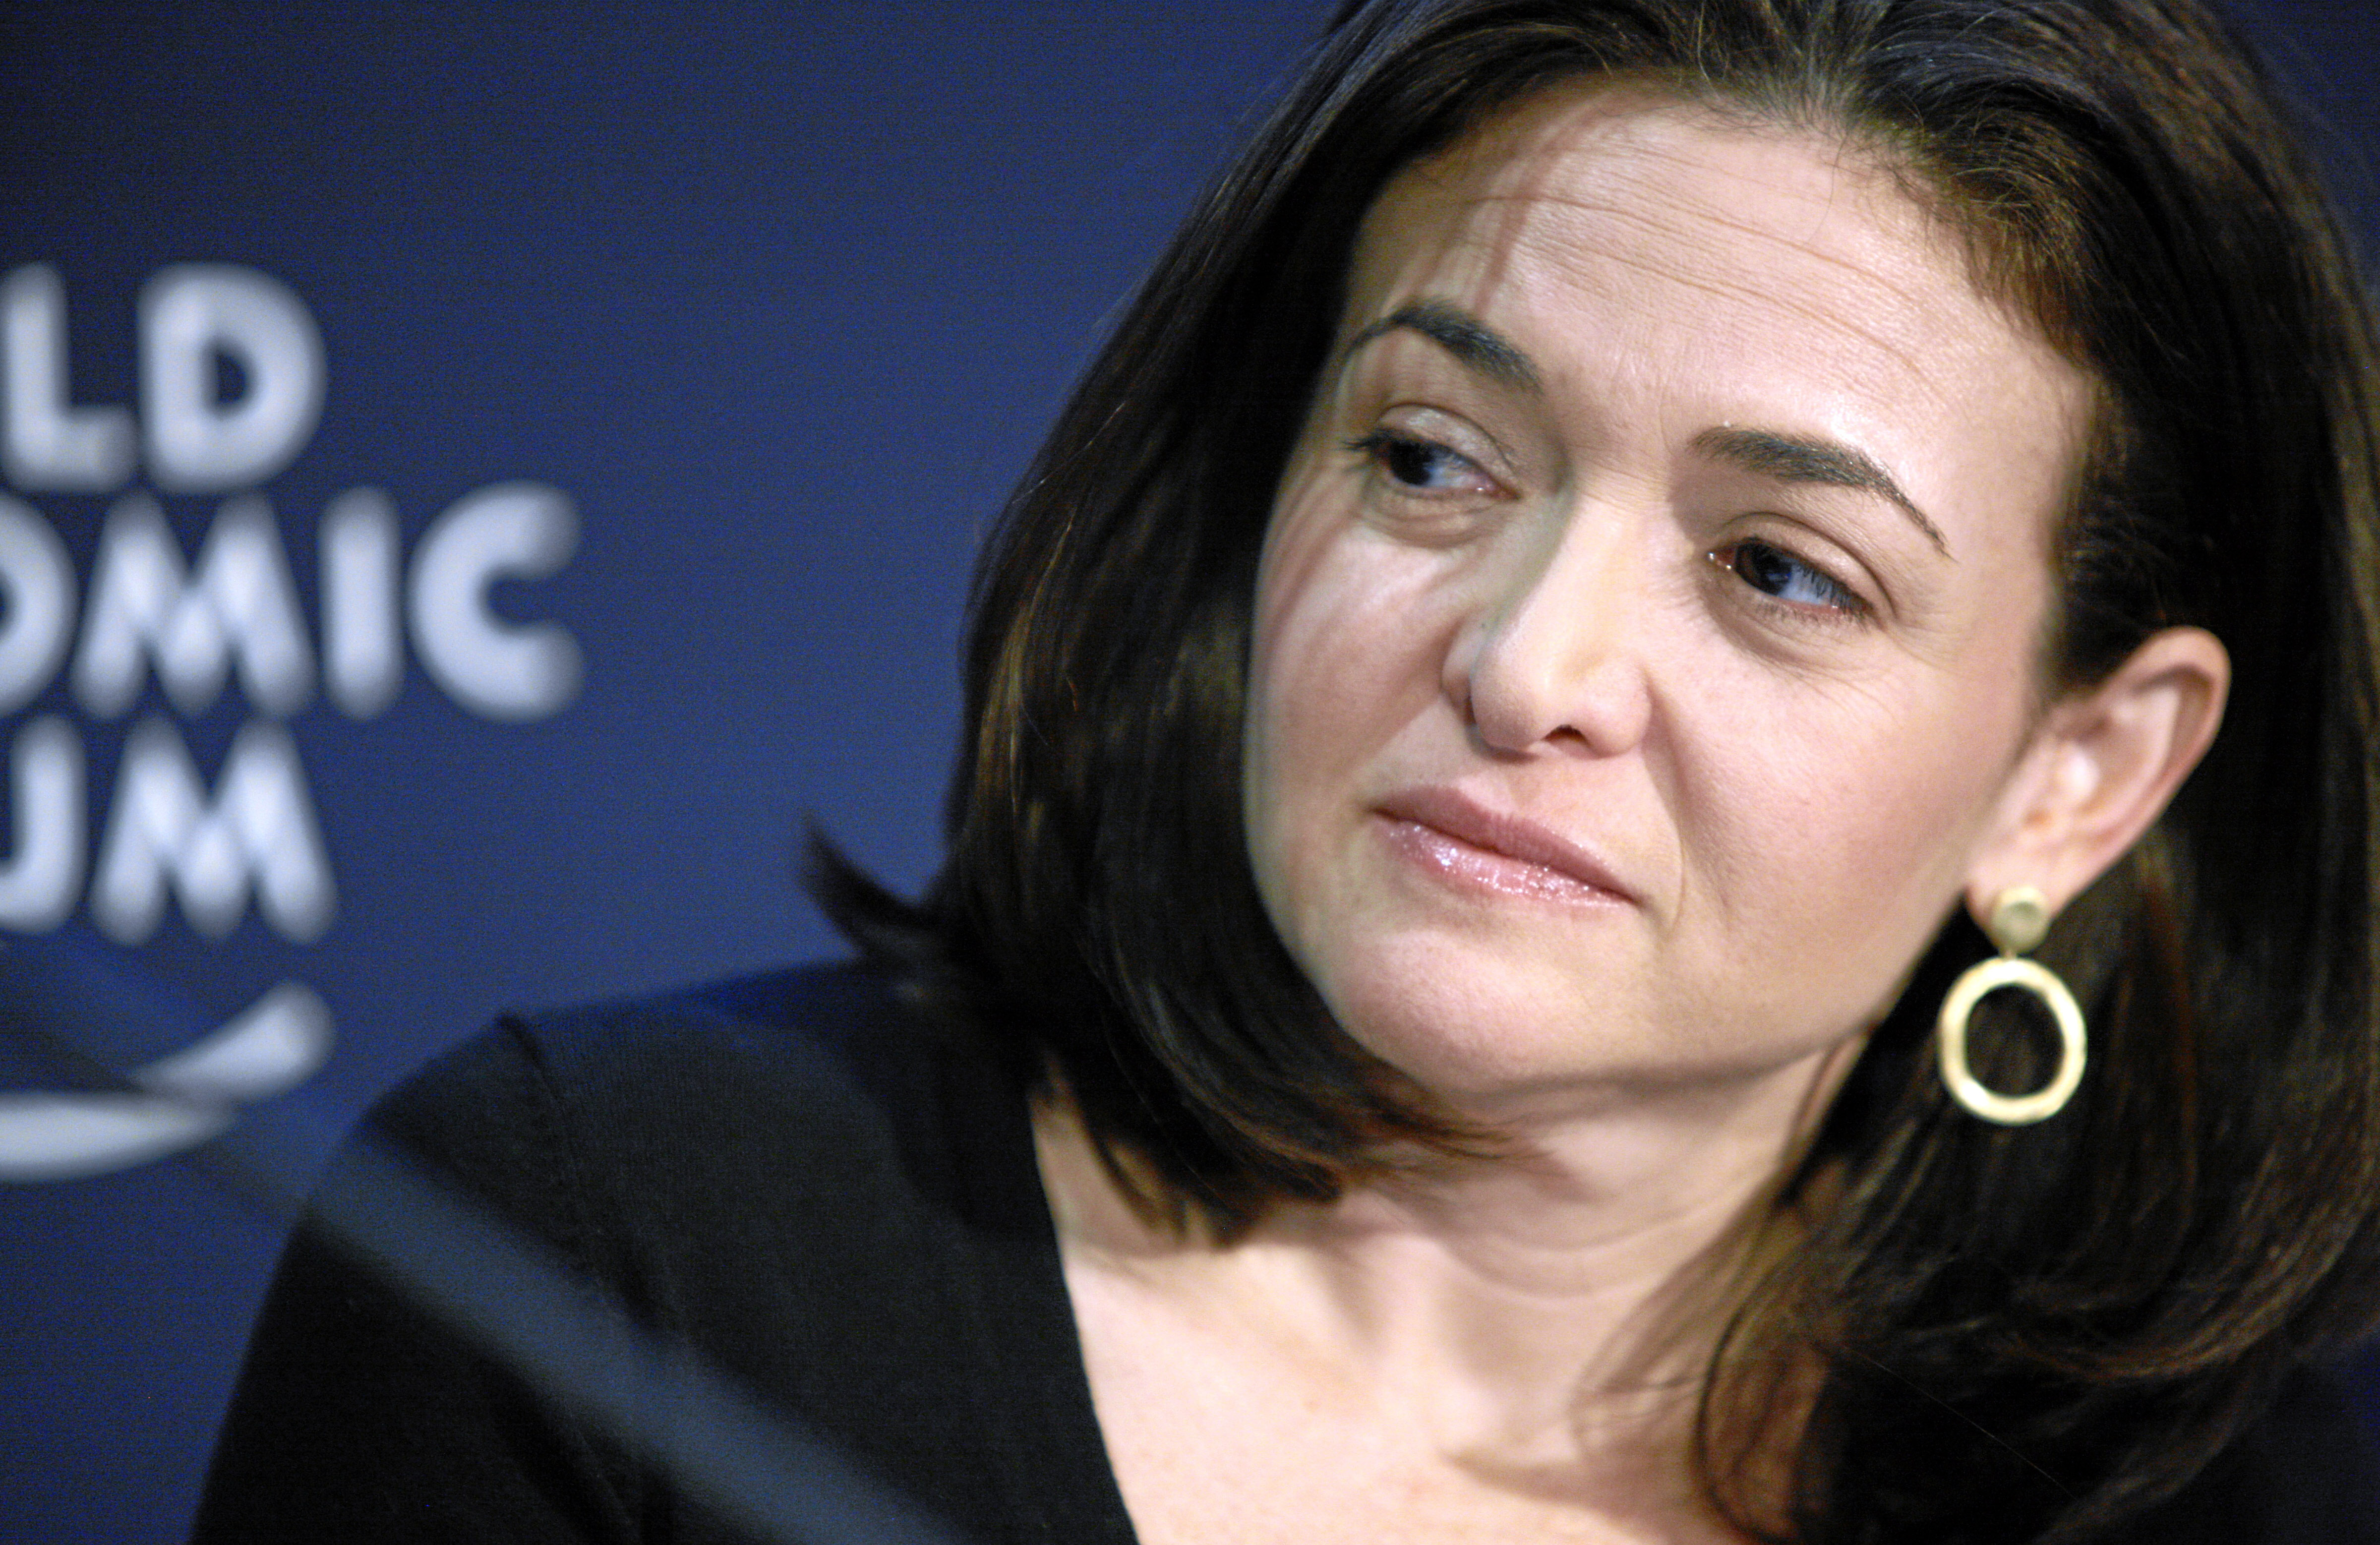 DAVOS/SWITZERLAND, 28JAN11 - Sheryl Sandberg, Chief Operating Officer, Facebook, USA; Young Global Leader are captured during the session 'Handling Hyper-connectivity' at the Annual Meeting 2011 of the World Economic Forum in Davos, Switzerland, January 28, 2011. Copyright by World Economic Forum swiss-image.ch/Photo by Jolanda Flubacher